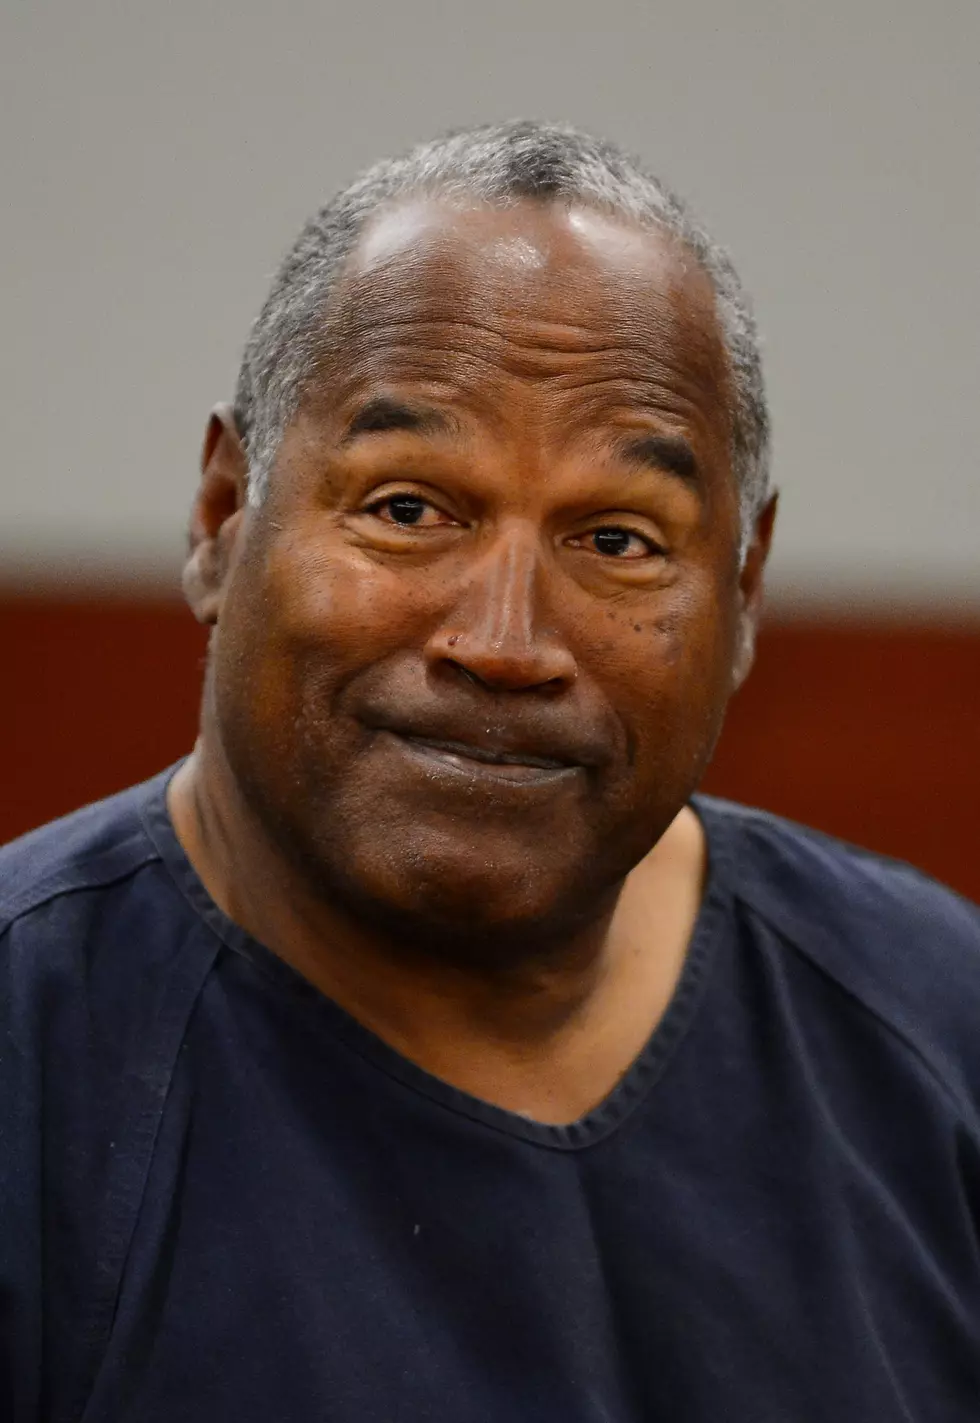 Is There Hope For O.J. Simpson